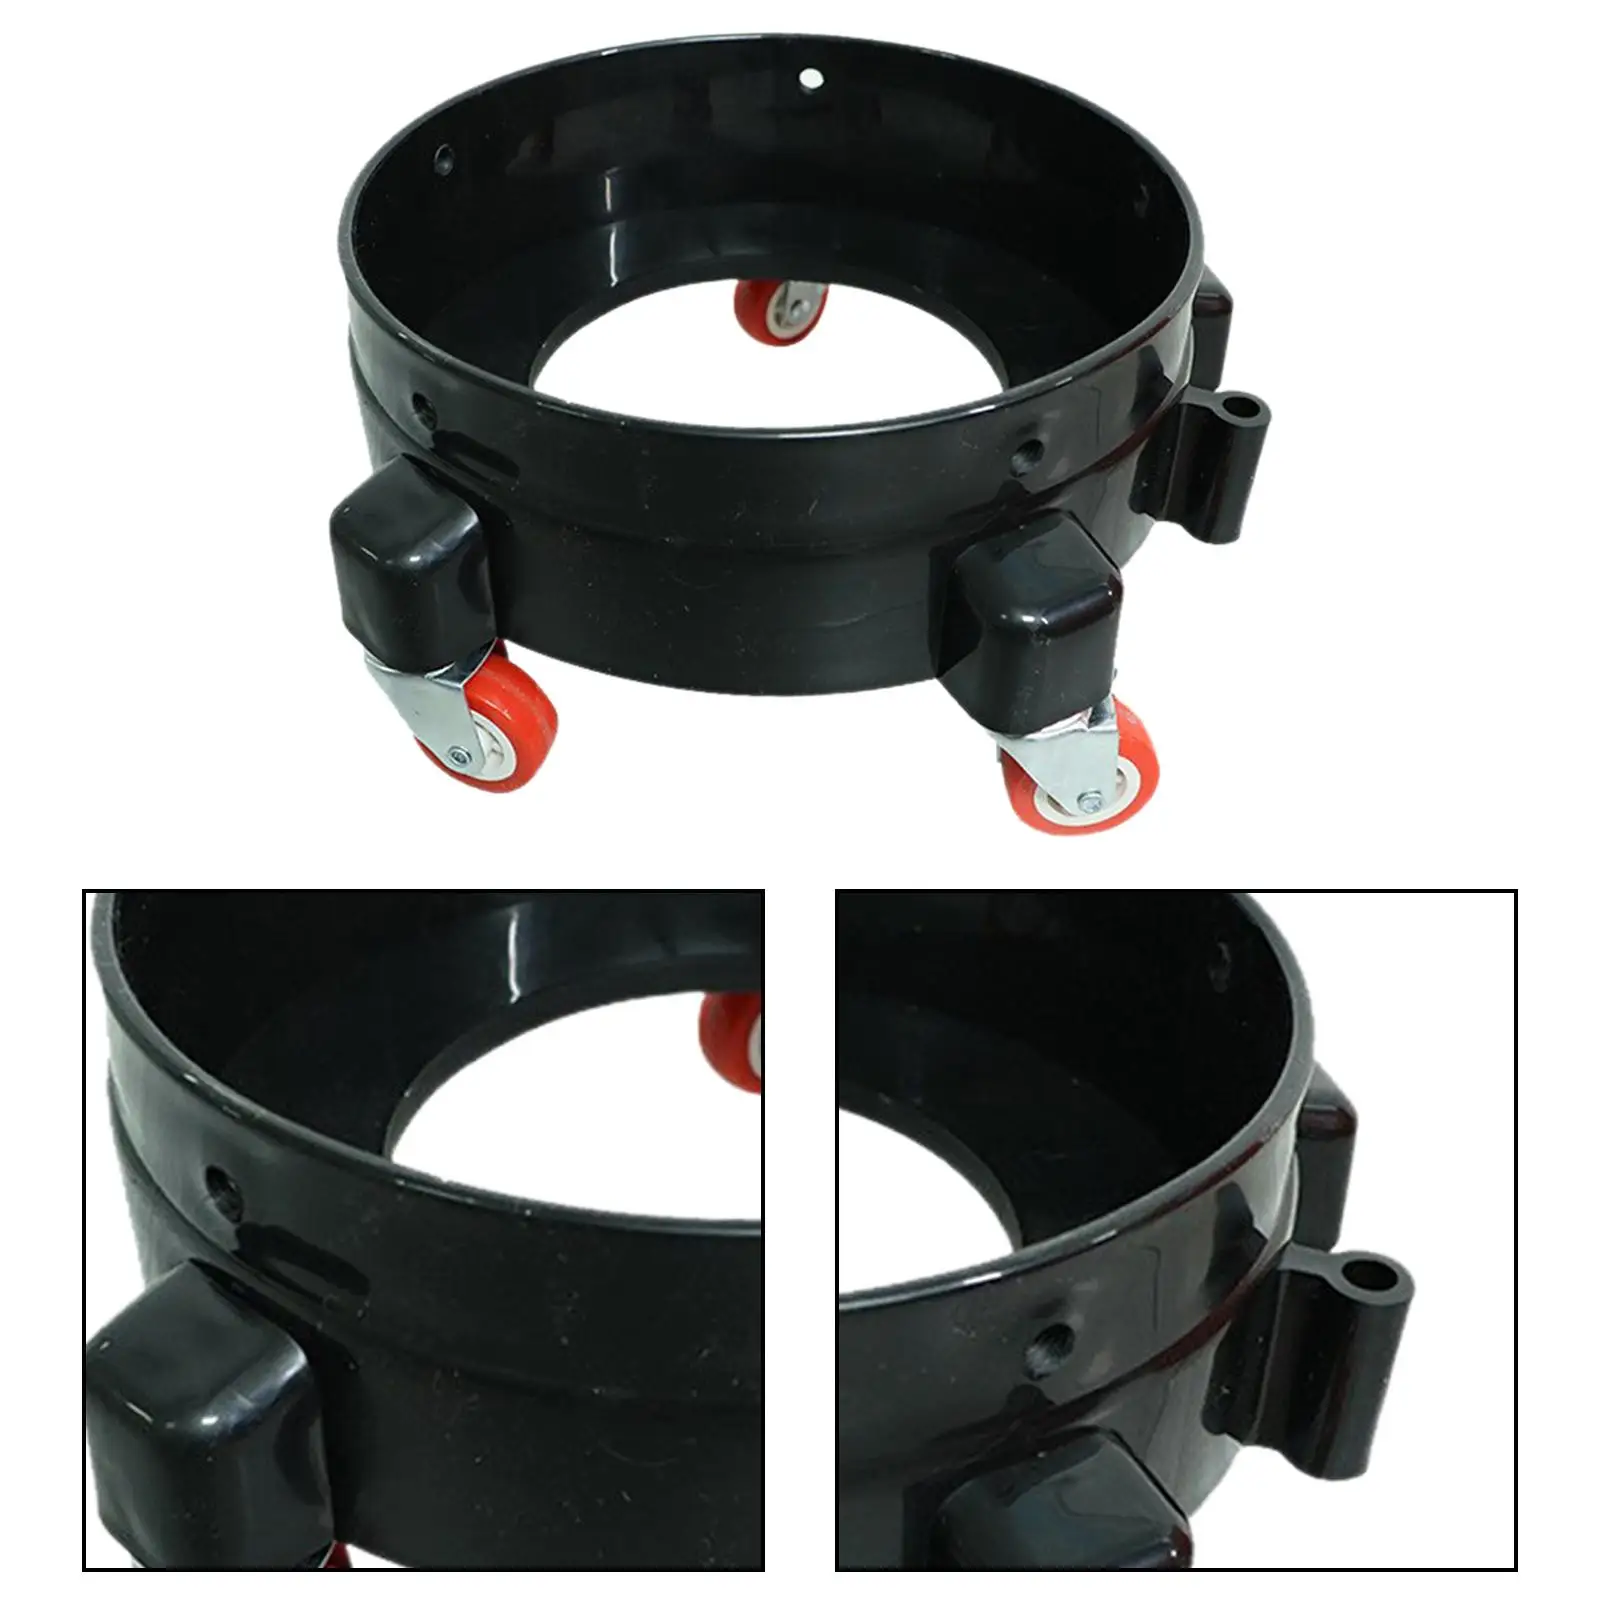 Swivel Casters Easy to Push Painting Vehicle Cars Wash Rolling Bucket Dolly